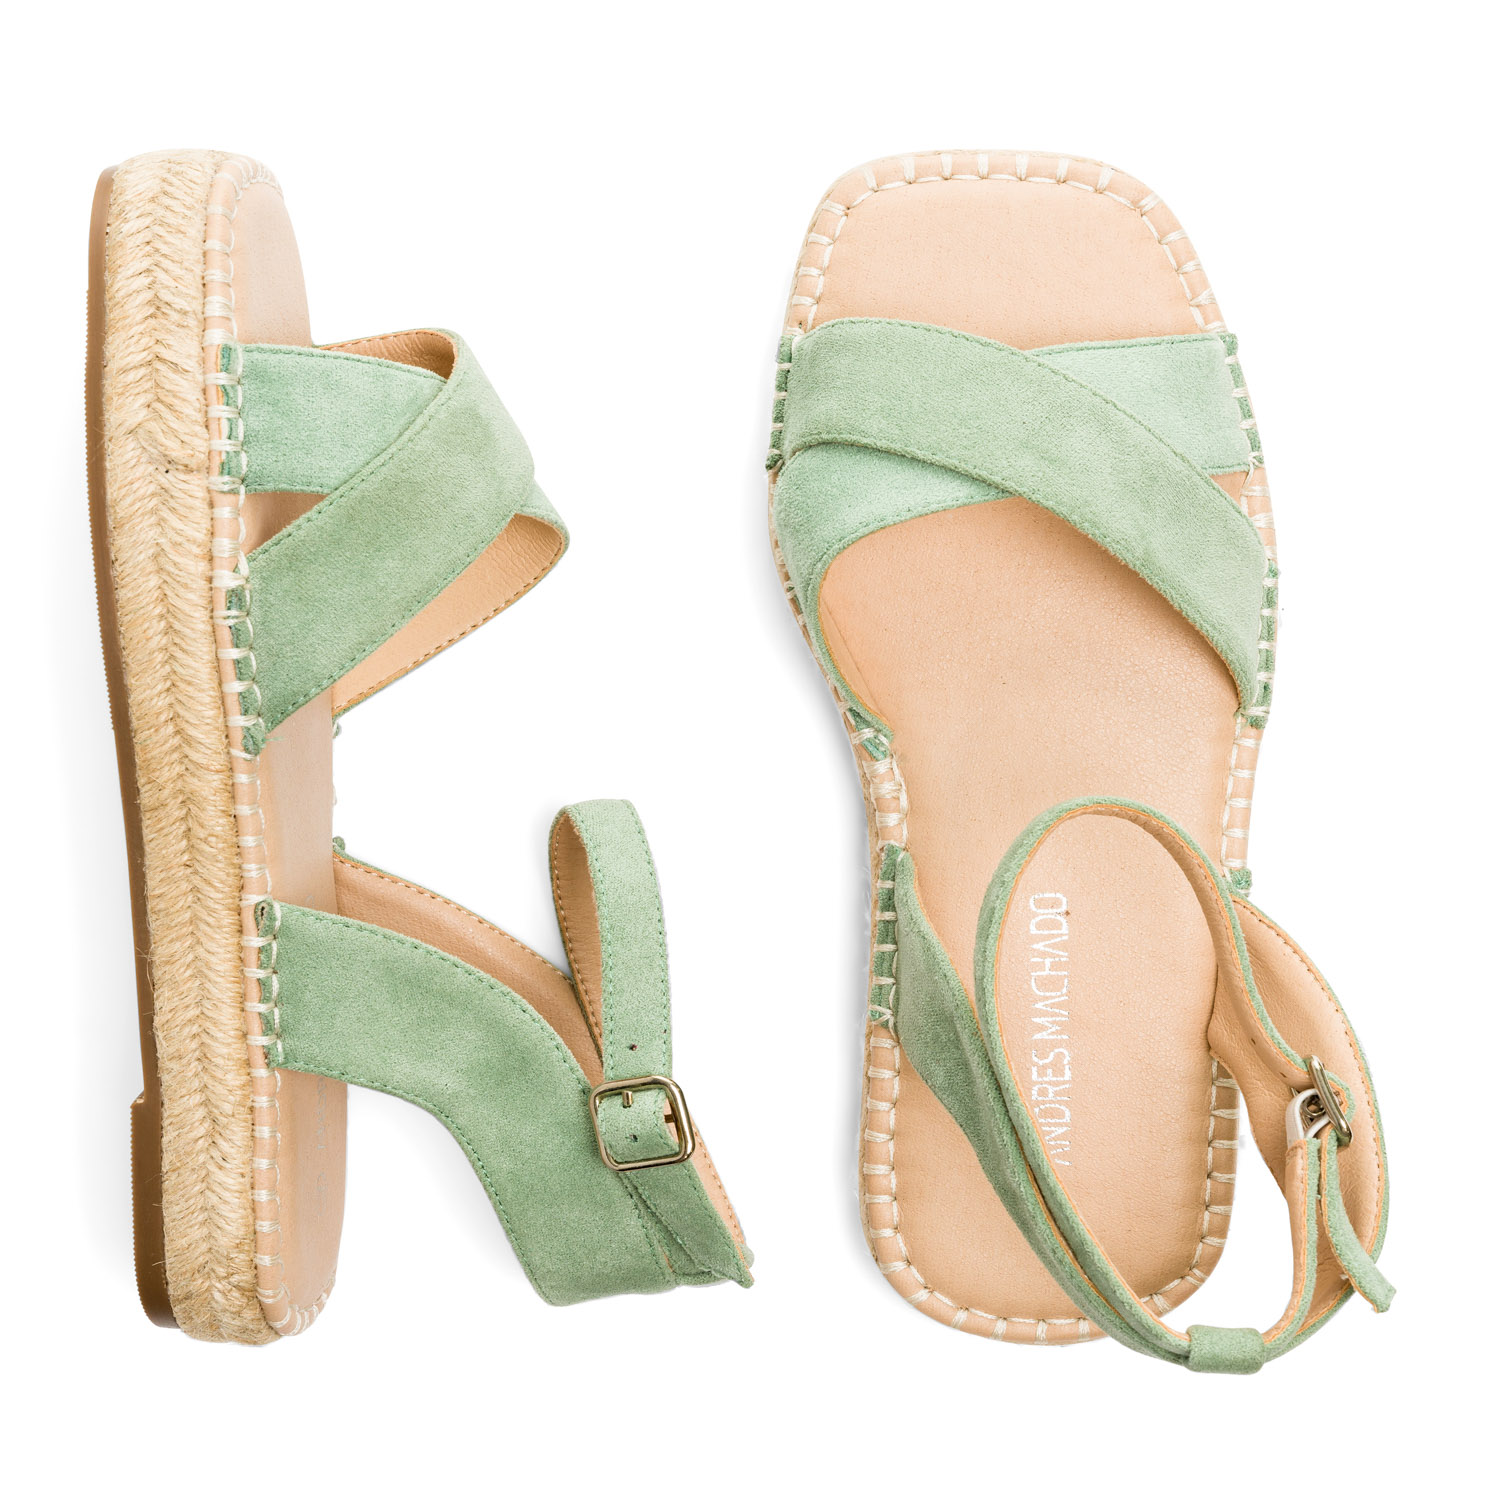 Mint faux suede sandals with jute wedge 